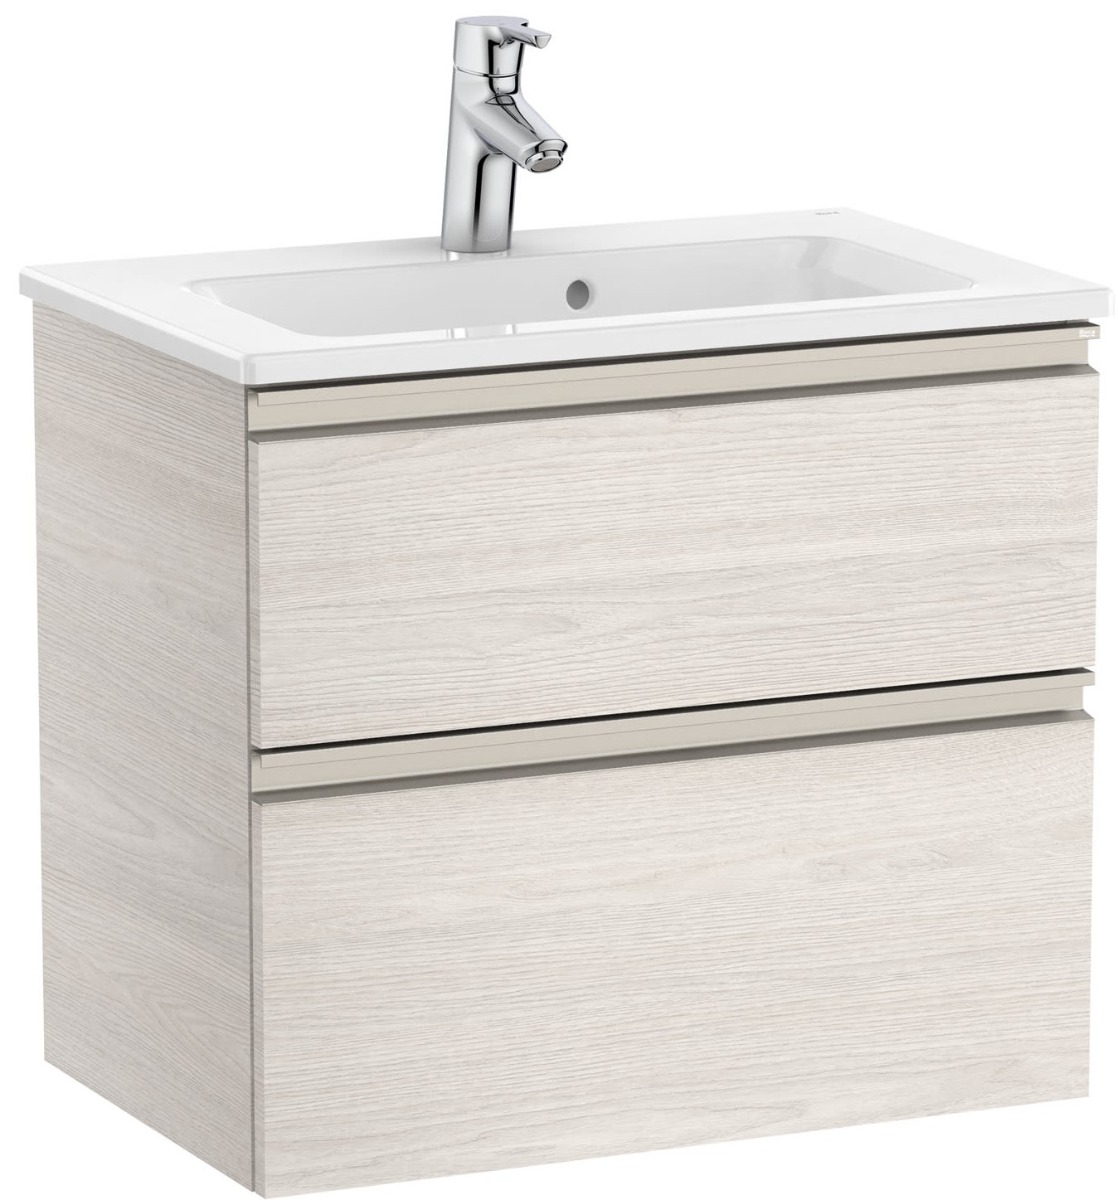 Unik (compact base unit with two drawers and basin)-434 - NORDIC ASH